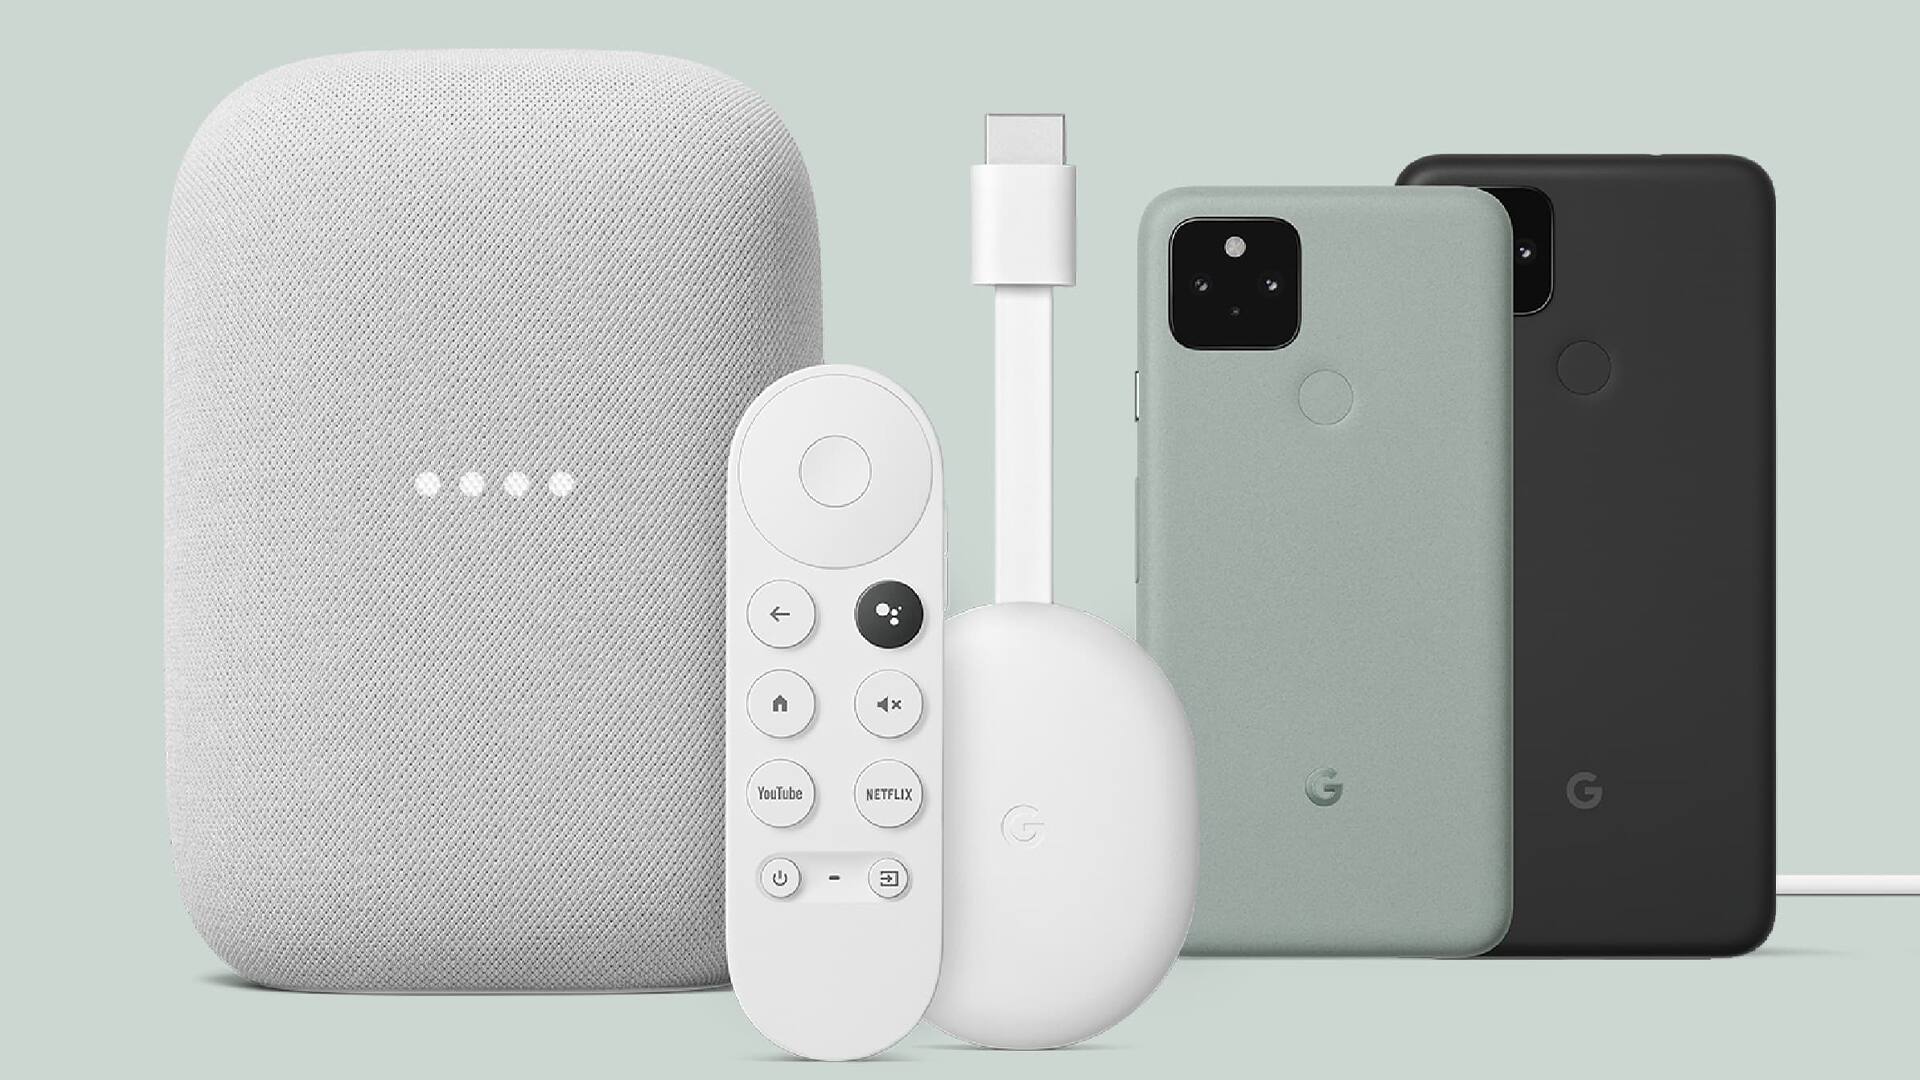 Google products on a green background. Features the Google Nest, Chrome Cast, and Pixel.